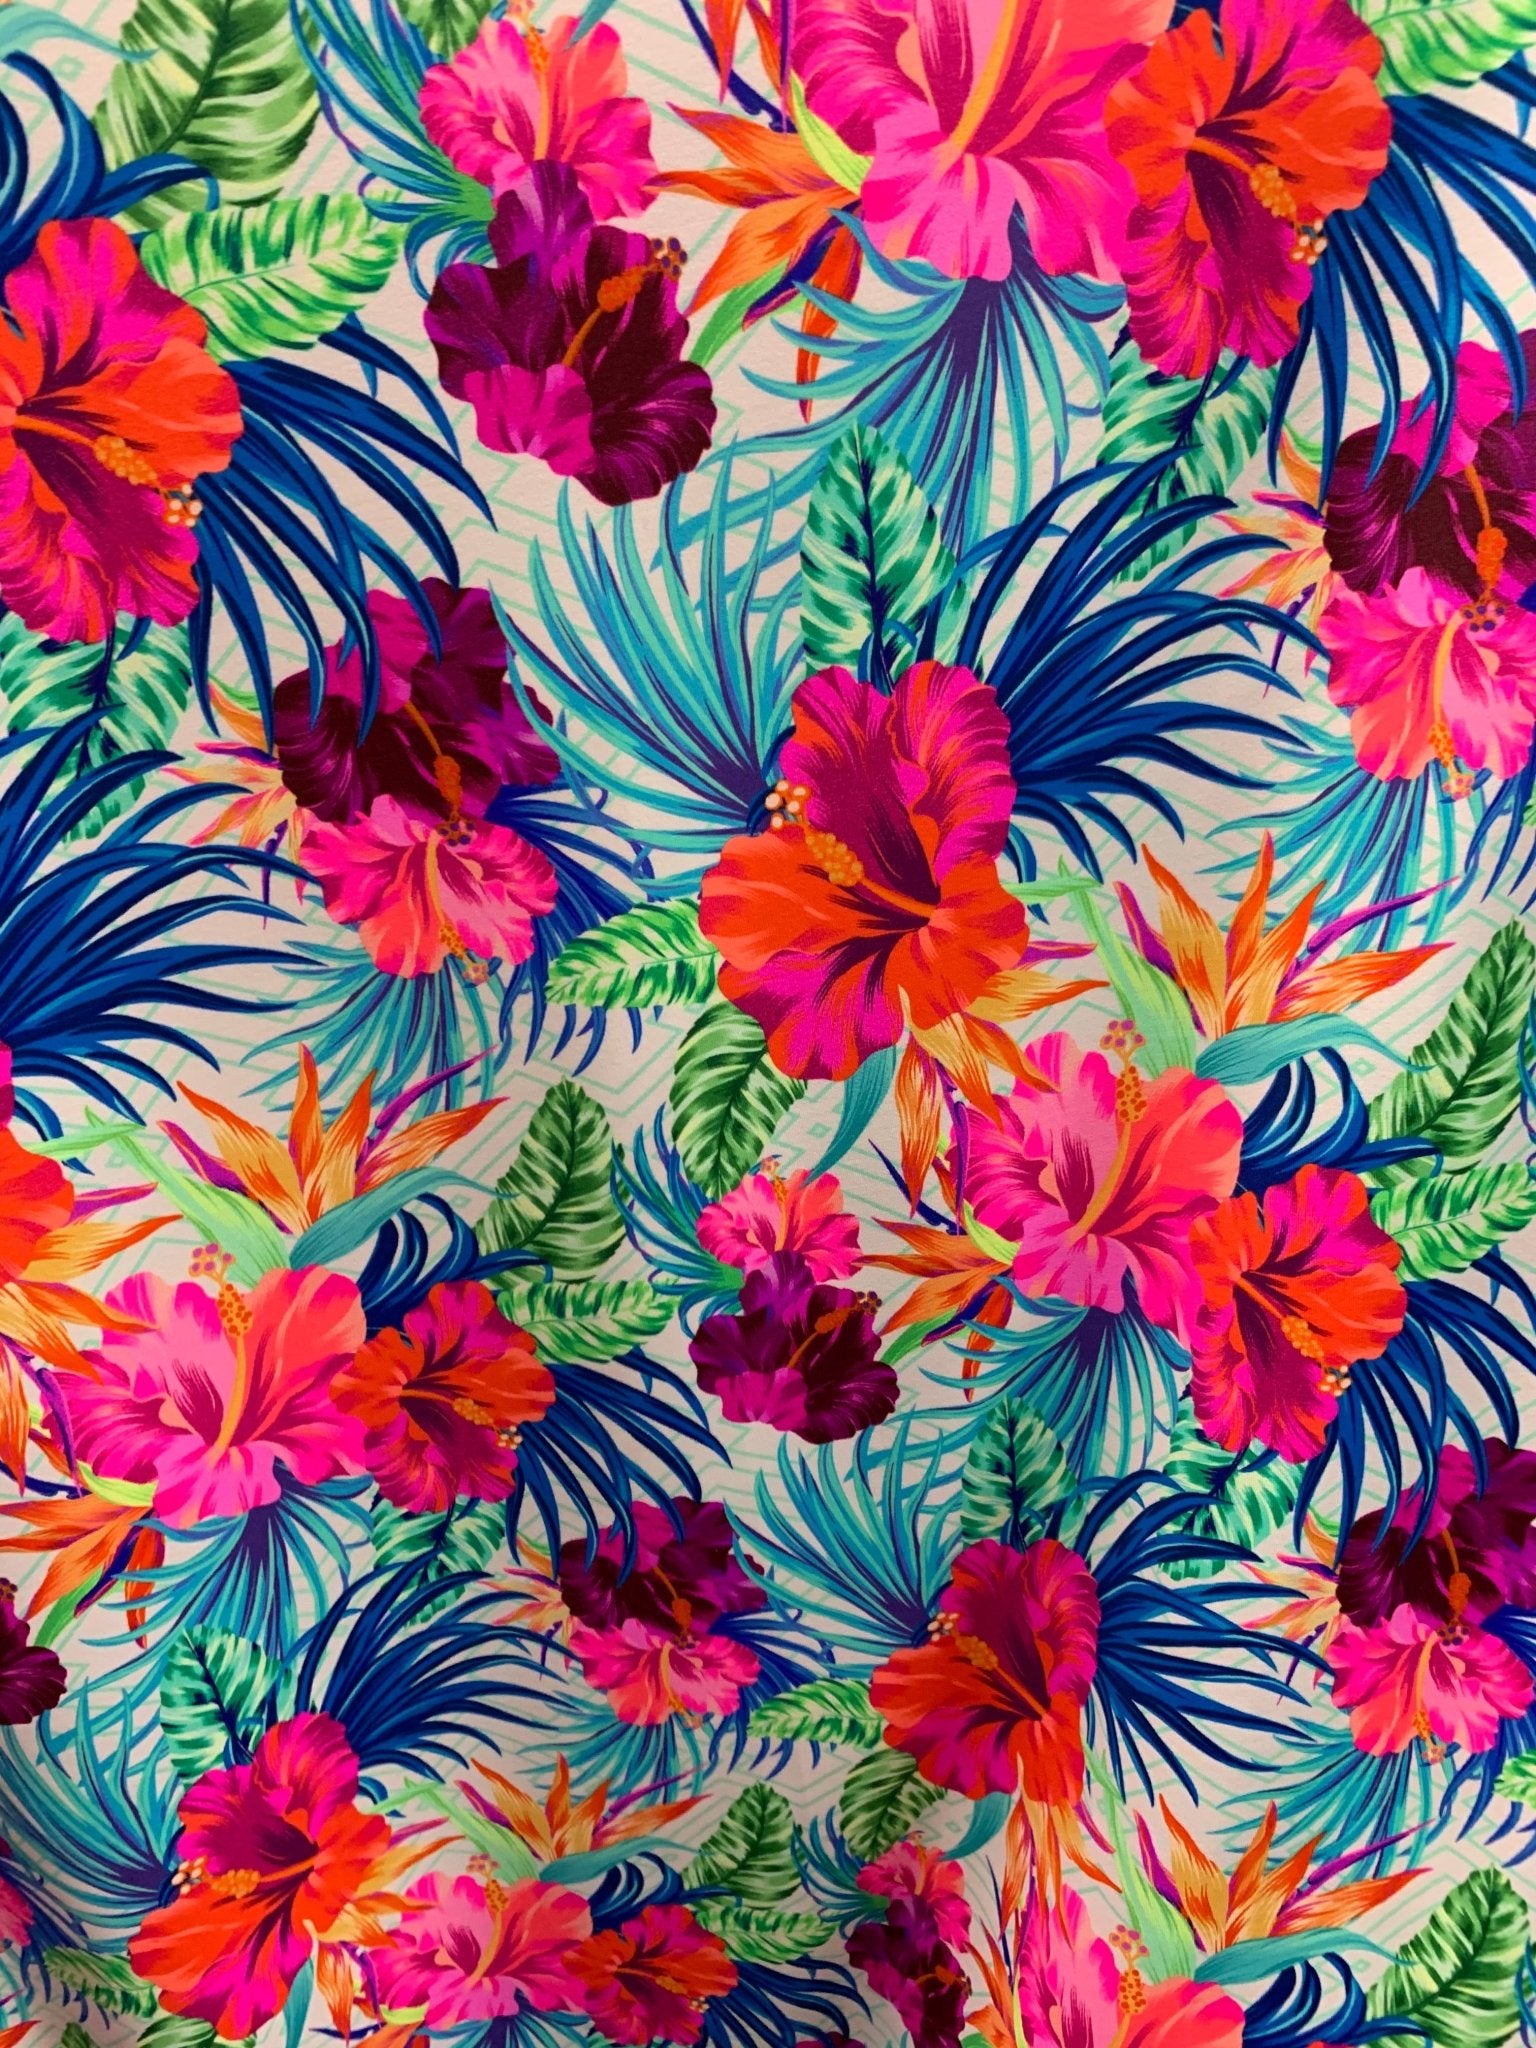 Hawaii Print Floral Nylon Spandex Swimsuit Fabric By The Yard